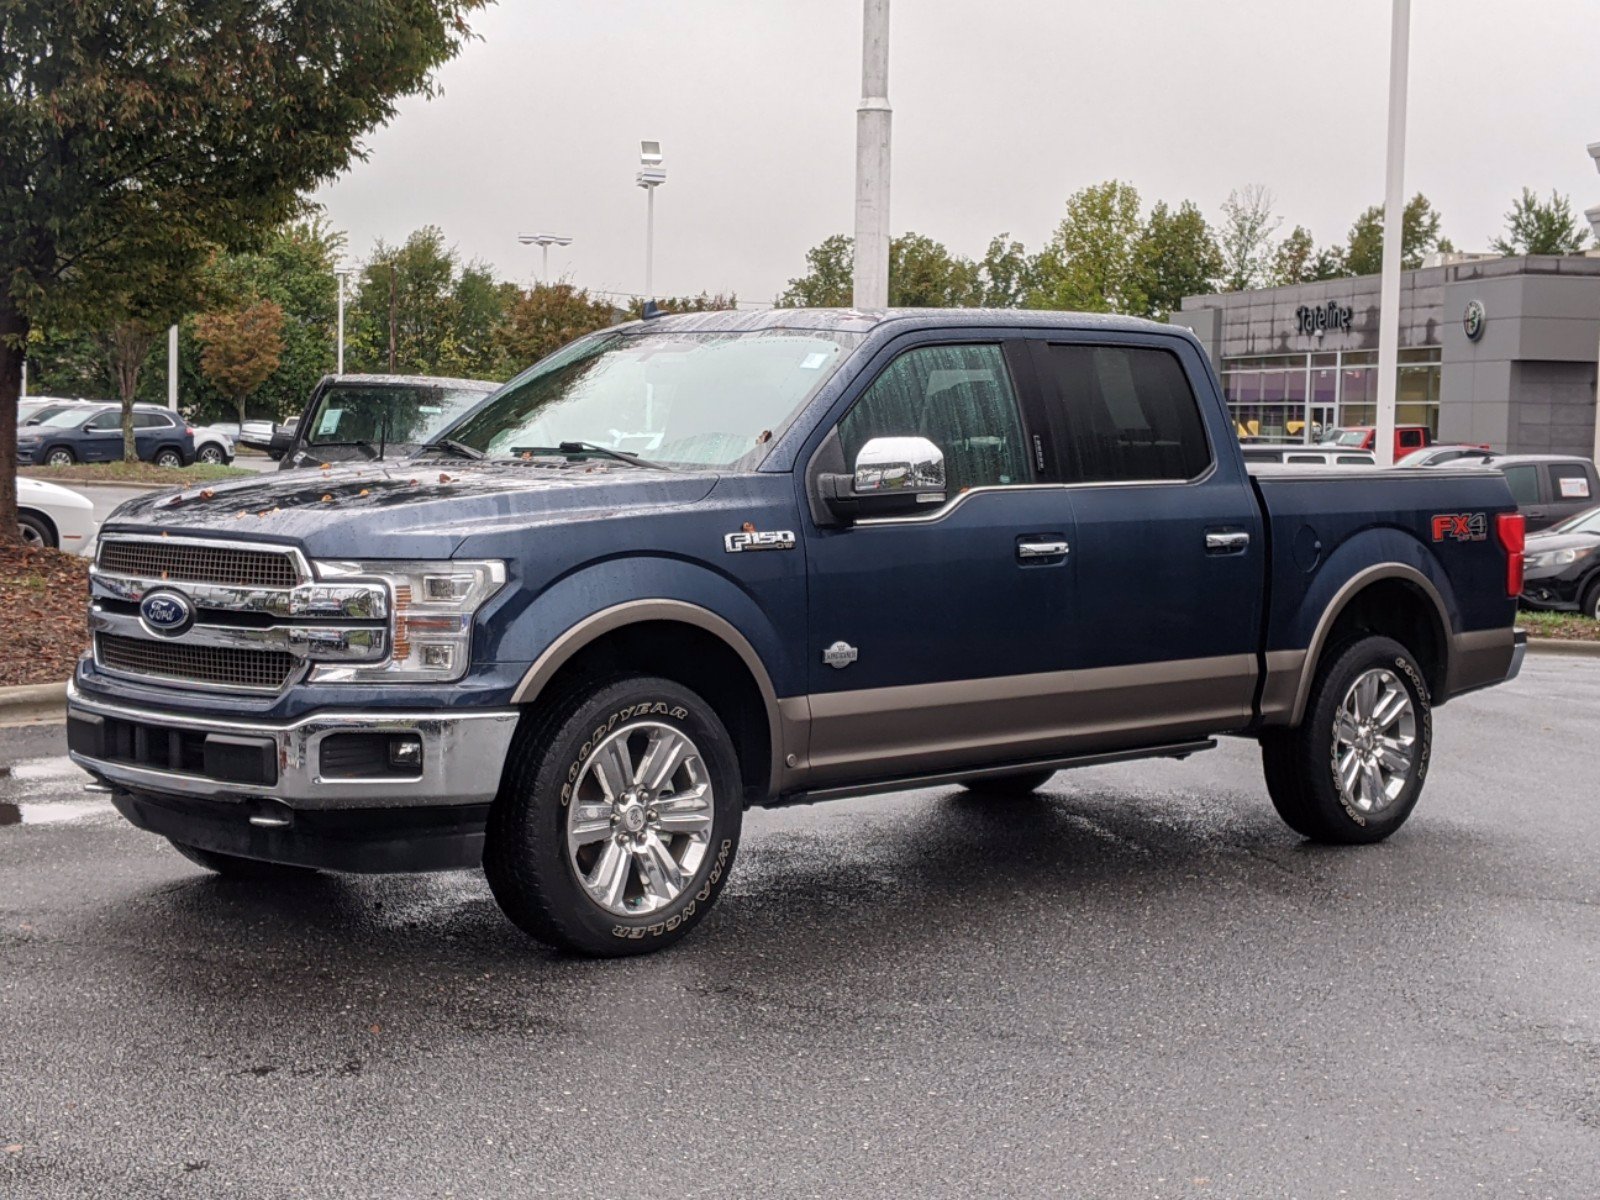 PreOwned 2018 Ford F150 King Ranch Crew Cab Pickup in Fort Mill